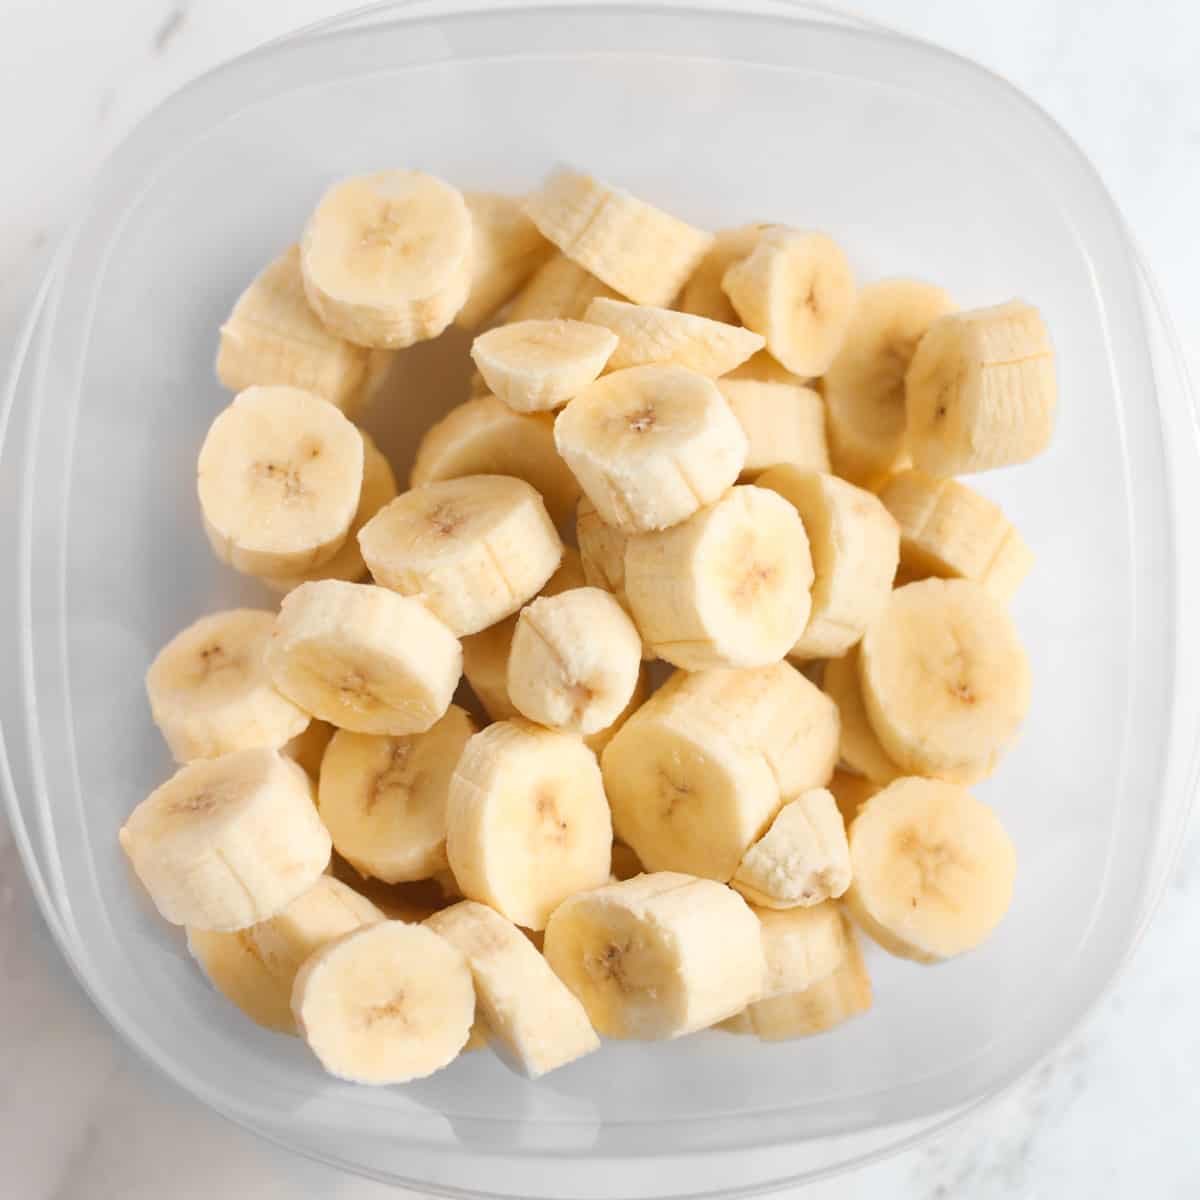 Frozen sliced bananas in a plastic storage container.